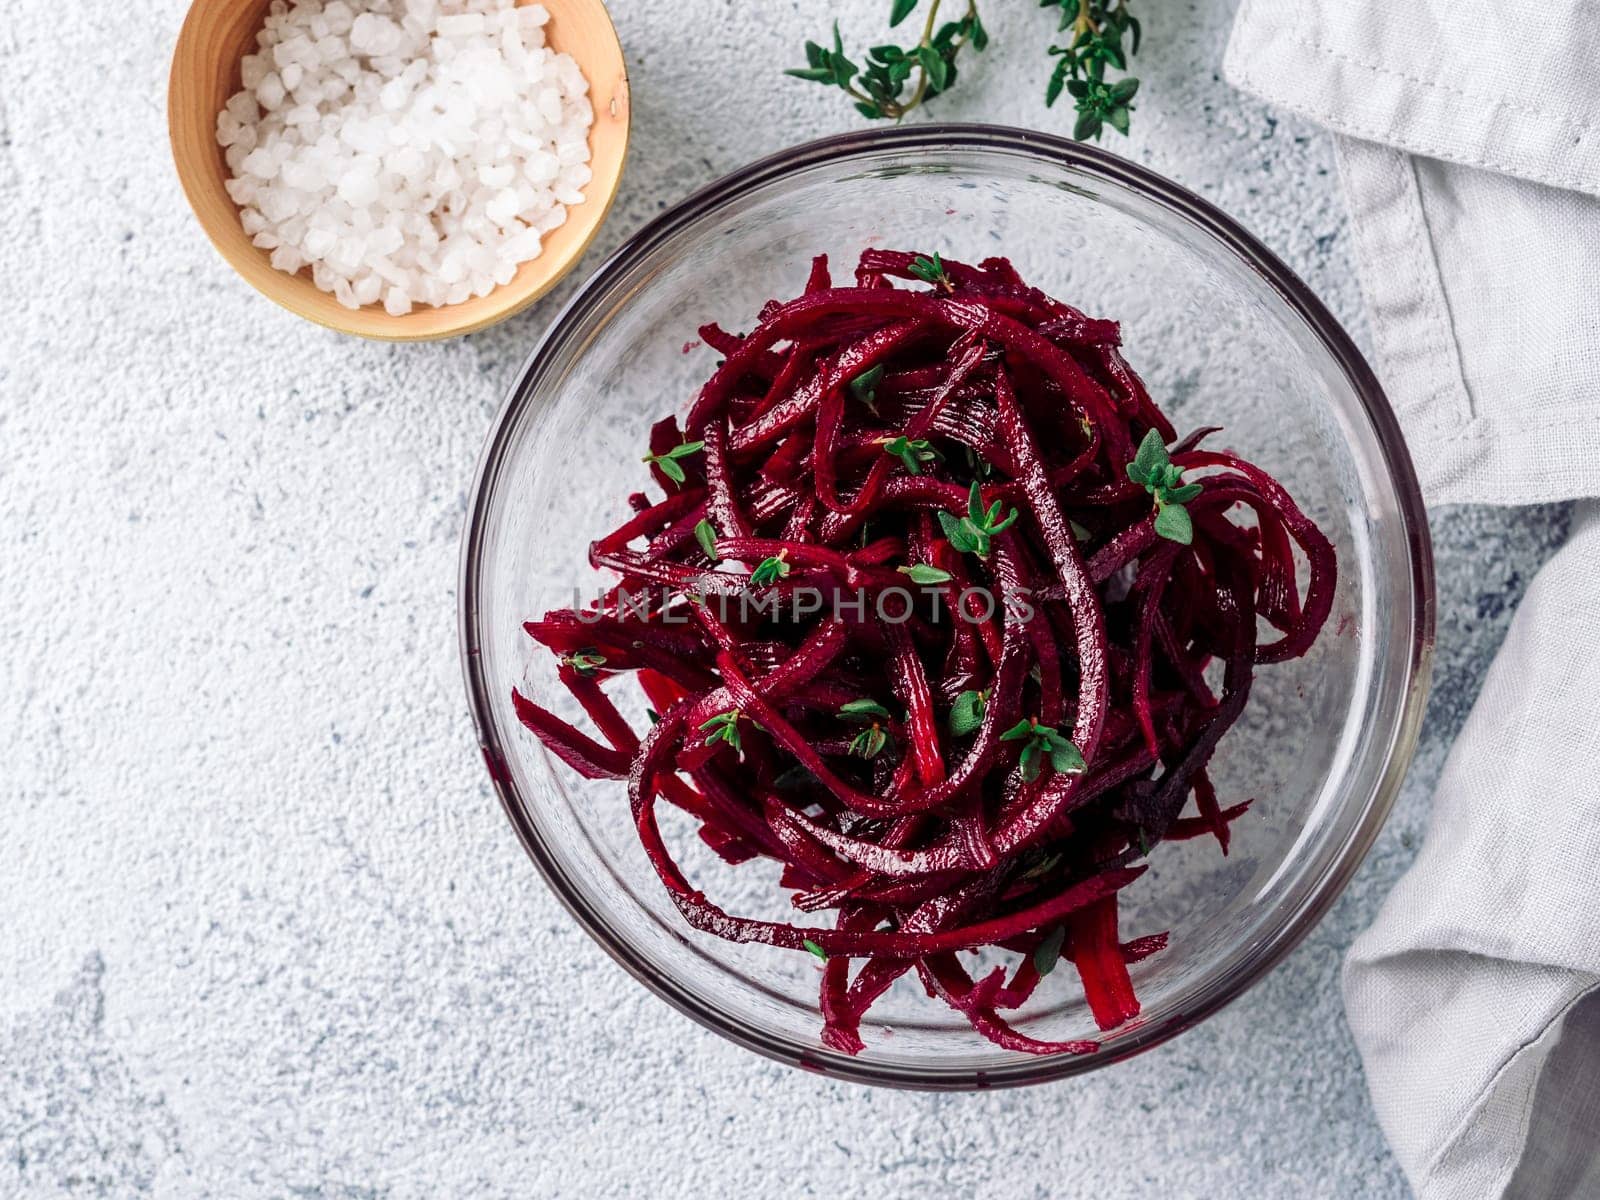 Raw beetroot noodles salad. Vegetable noodles - beet spaghetti on gray cement background. Copy space for text. Ideas and recipe for Clean eating, raw vegetarian food concept. Top view or flat lay.